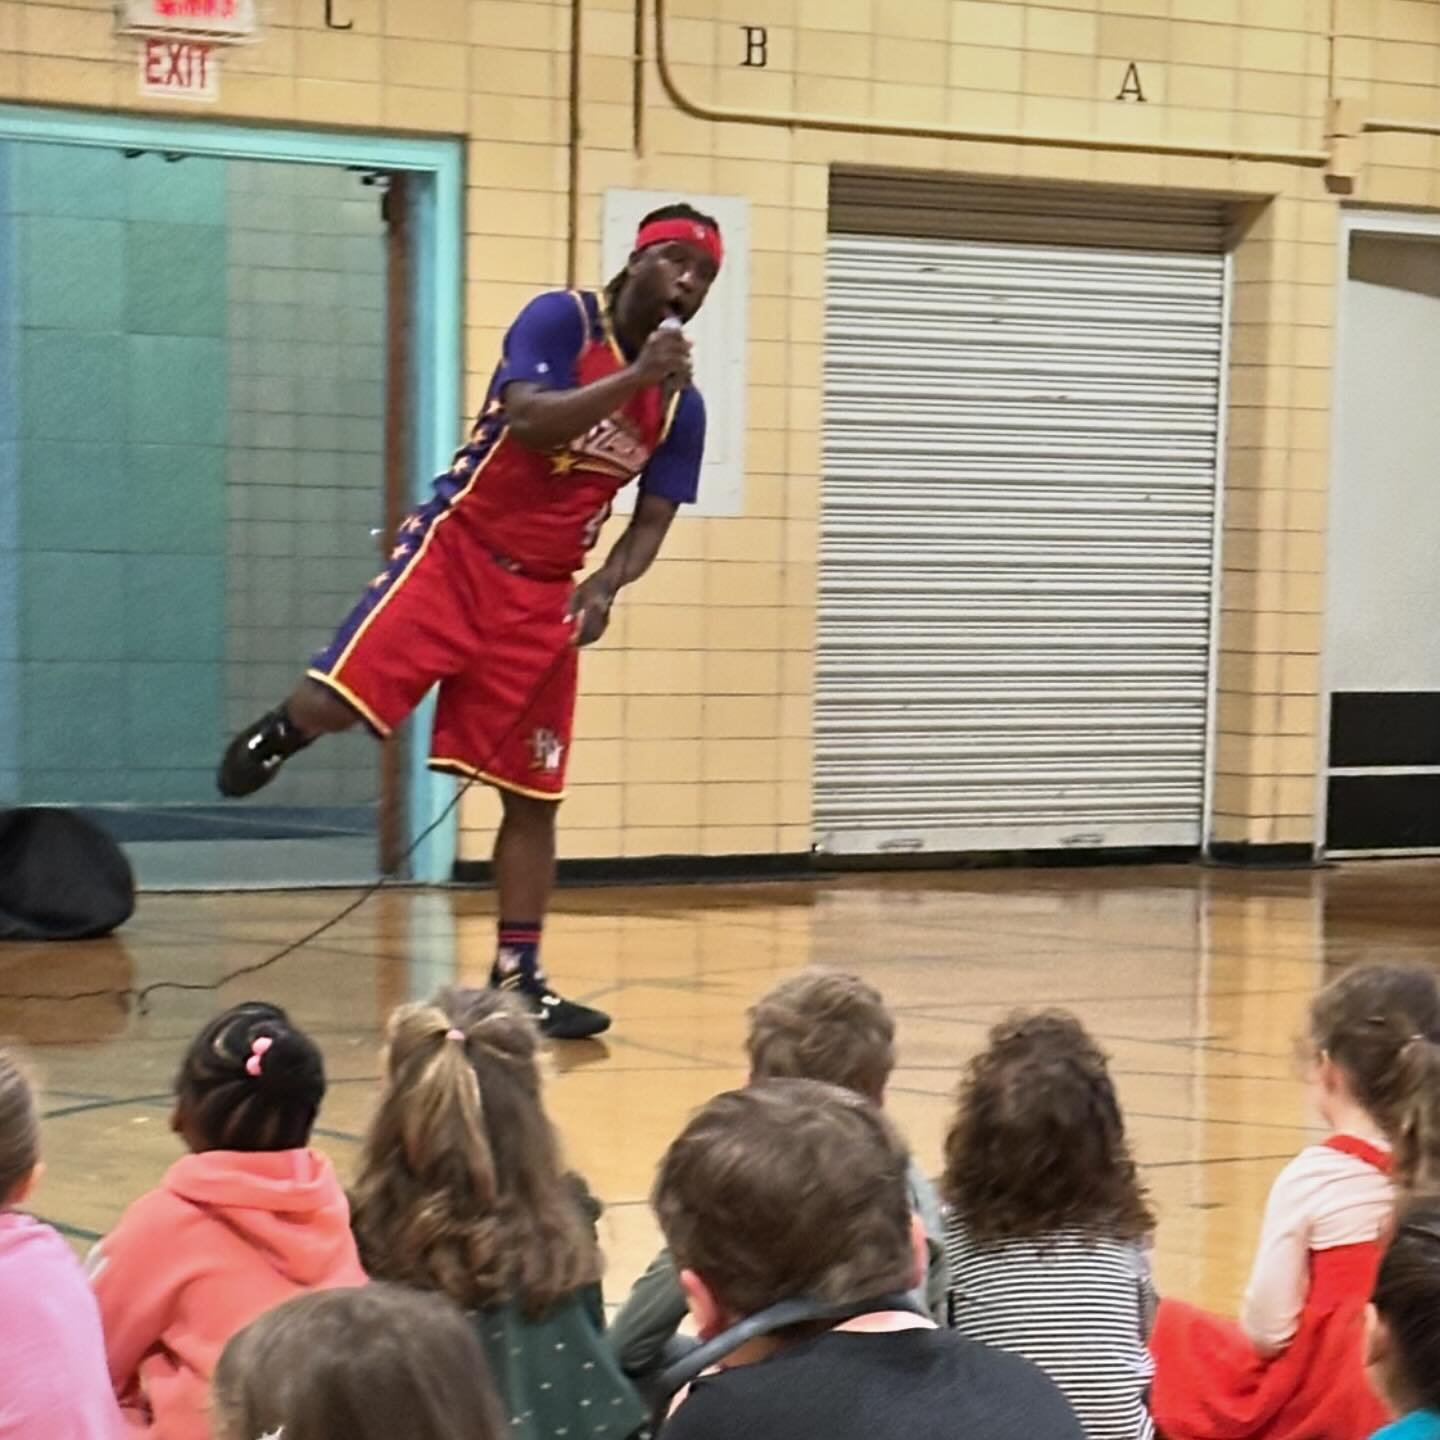 Thanks to the Harlem Wizards to visiting us today. Everyone had a blast! 🏀 #ps32brooklyn #oneschoolonefamily 💙💛 @worldfamousharlemwizards